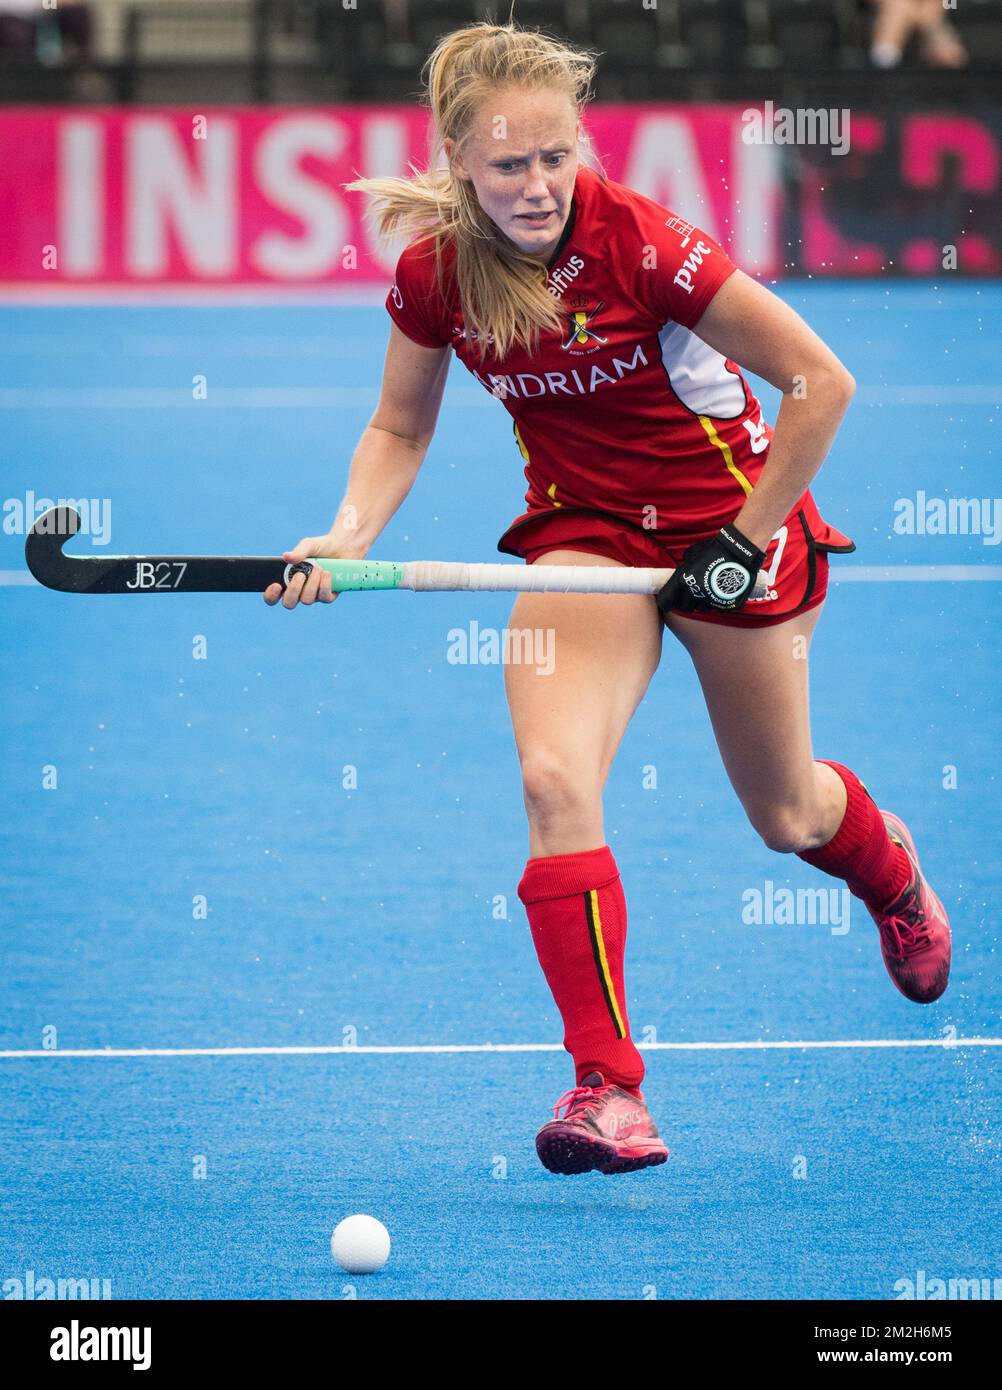 Belgium's Jill Boon pictured in action during the game between Australia and Belgium in group D at the Hockey Women's World Cup, in London, UK, Tuesday 24 July 2018. The Hockey Women's World Cup takes place from 21 July to 05 August at the Lee Valley Hockey Centre in London. BELGA PHOTO BENOIT DOPPAGNE  Stock Photo